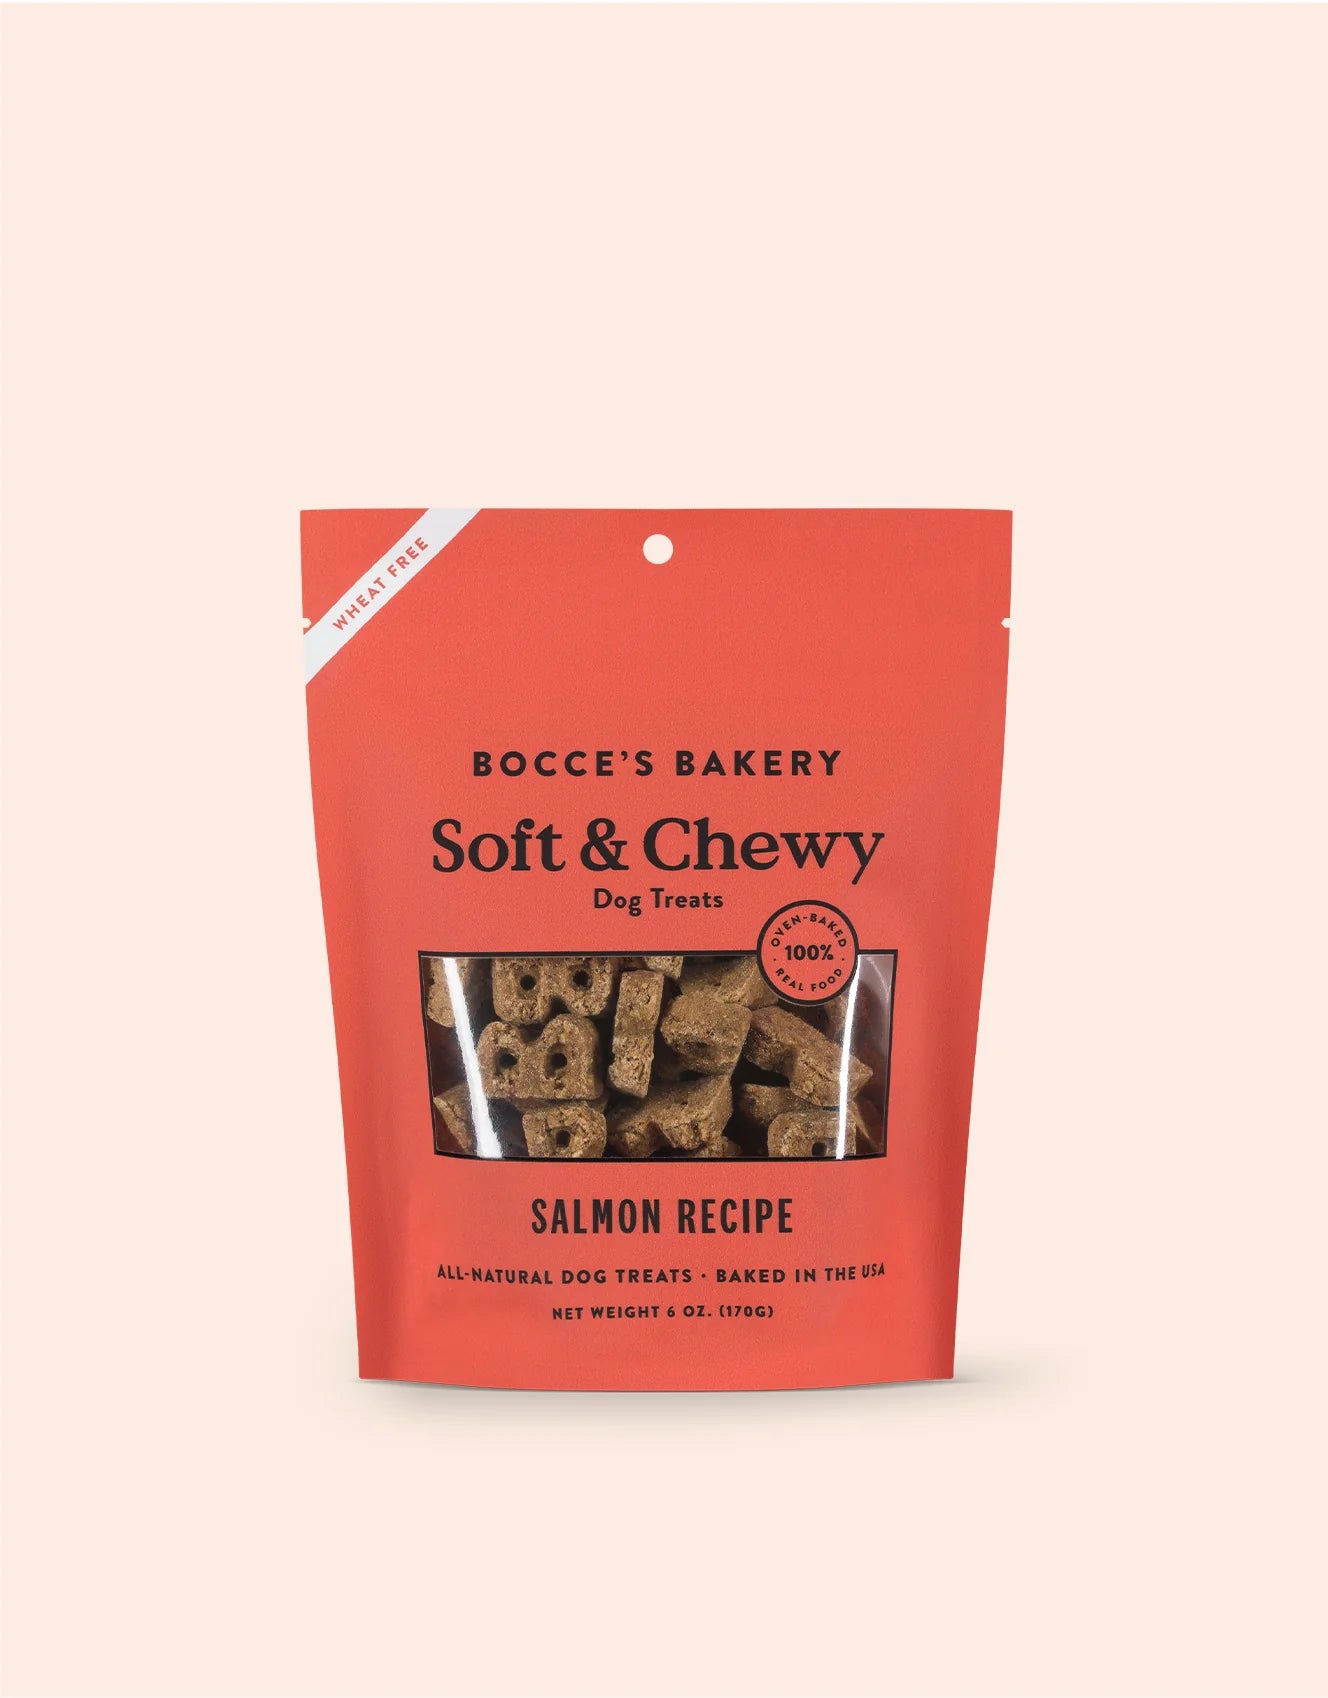 Bocce's Bakery Soft & Chewy Salmon Treats